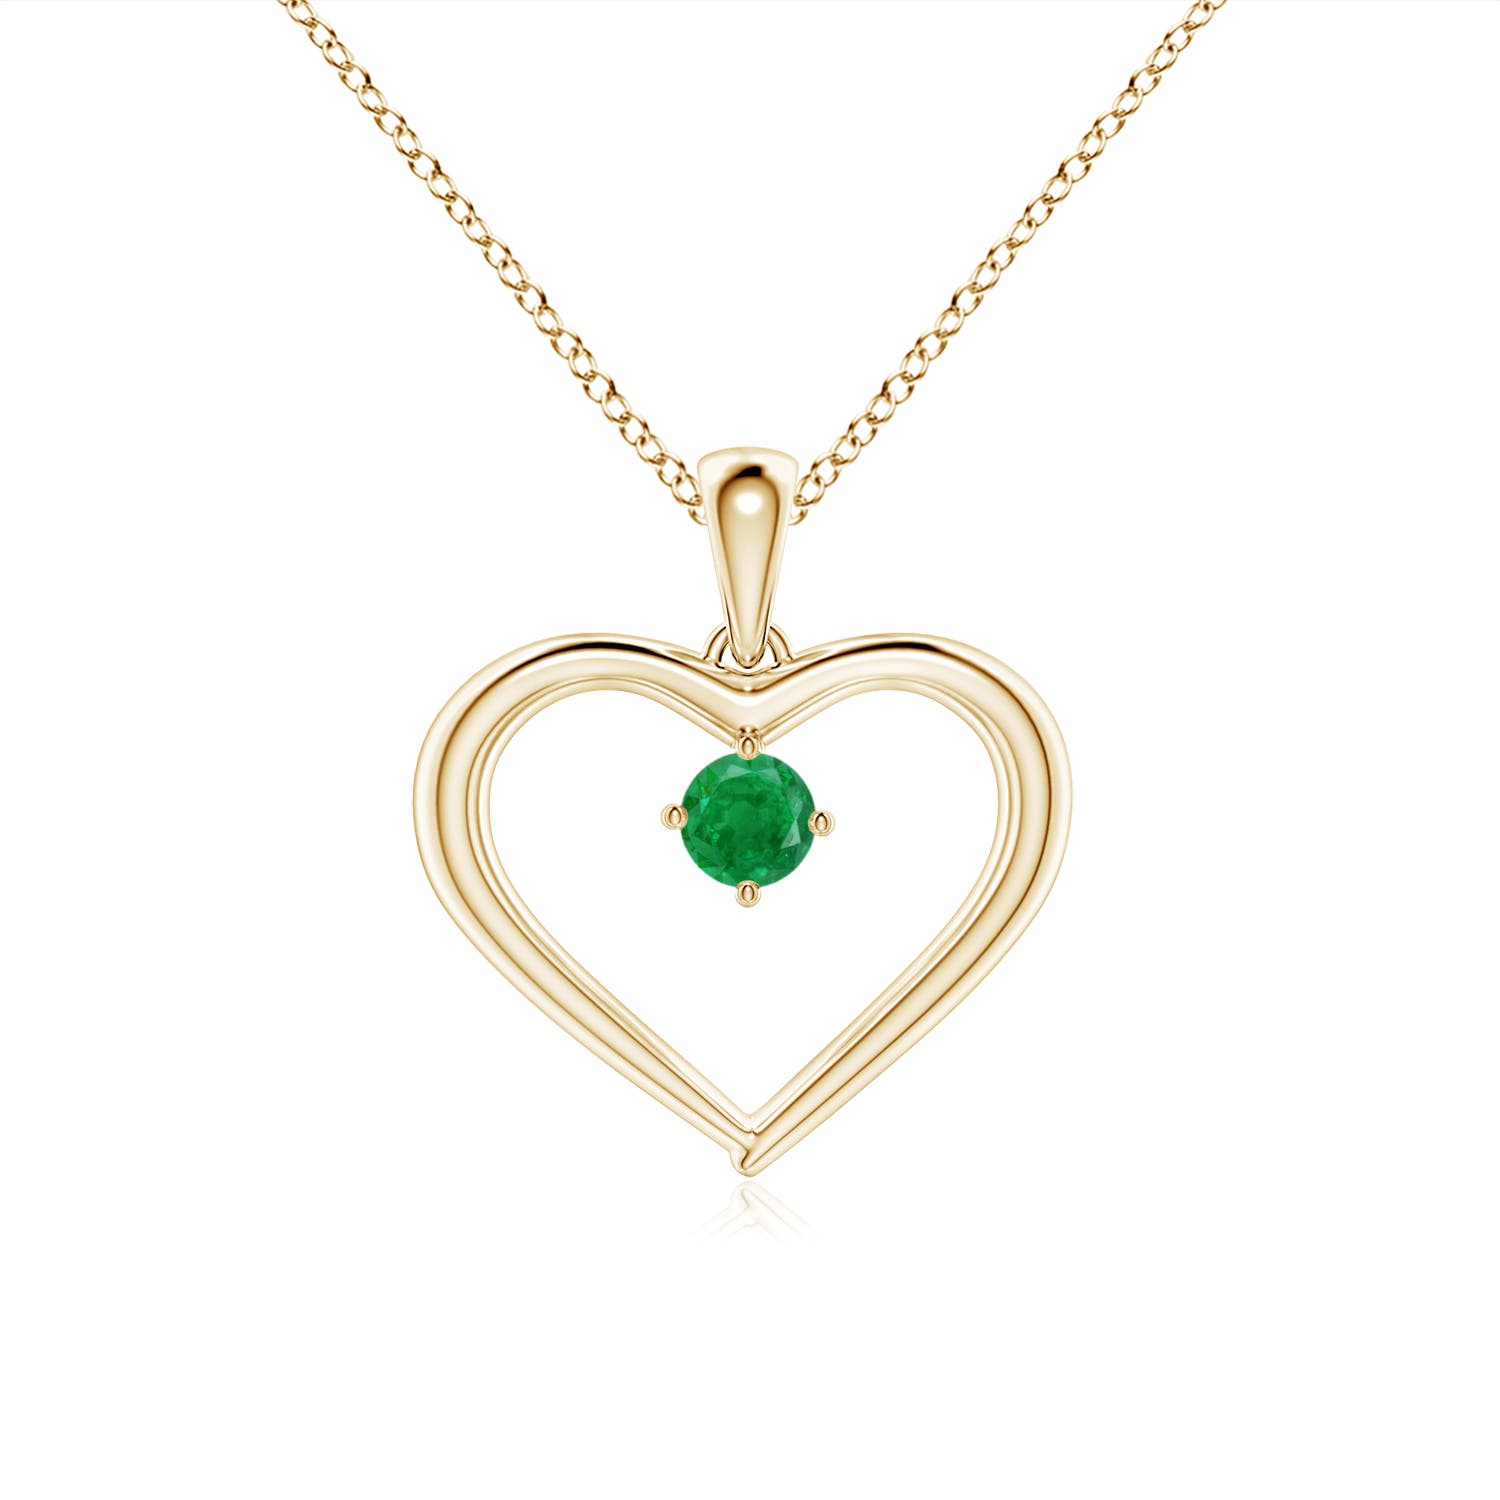 AA - Emerald / 0.1 CT / 14 KT Yellow Gold